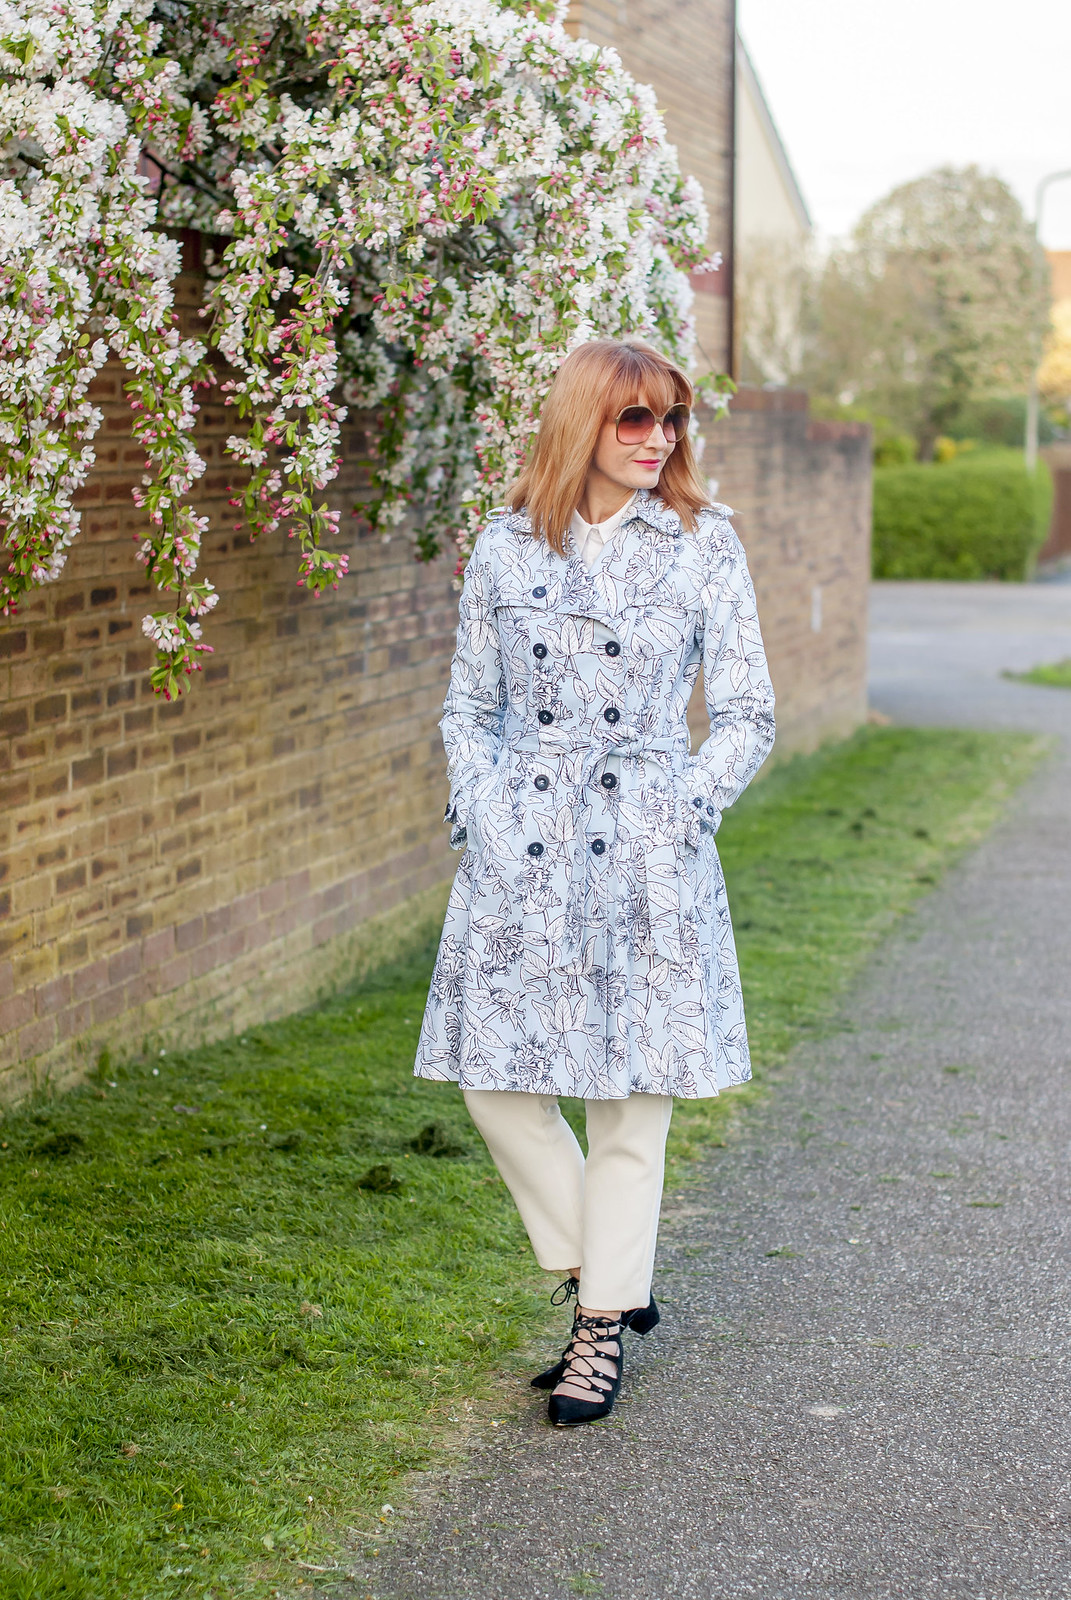 Spring fashion: Blue floral trench coat white trousers black lace-up ghillie shoes oversized 70s sunglasses | Not Dressed As Lamb, over 40 style